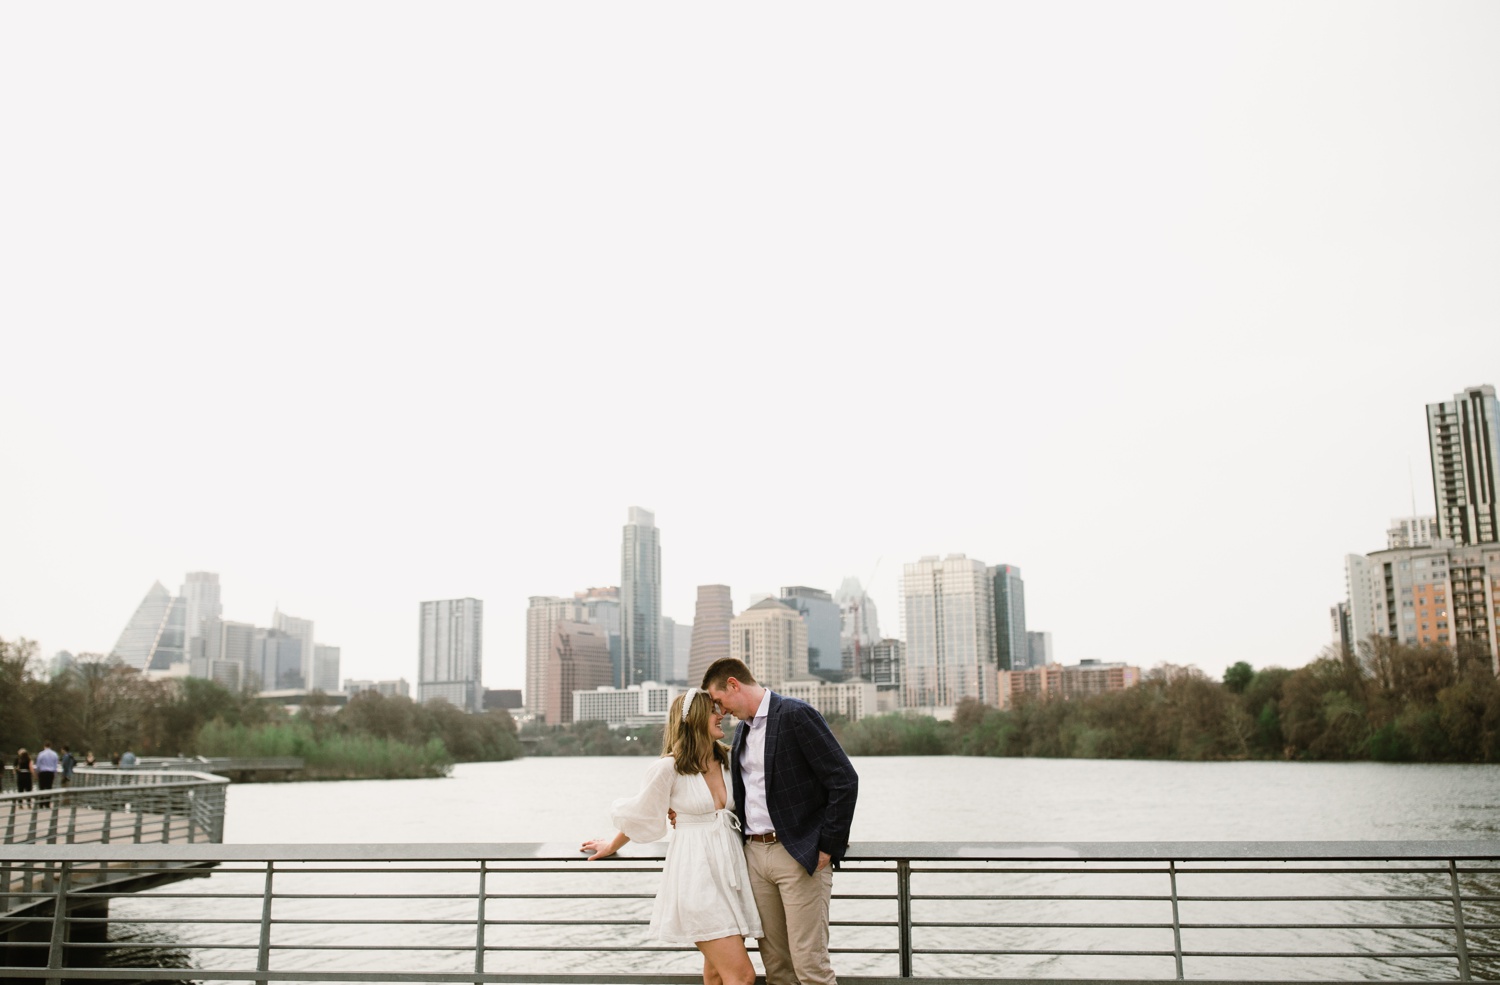 Outdoor engagement session in downtown Austin